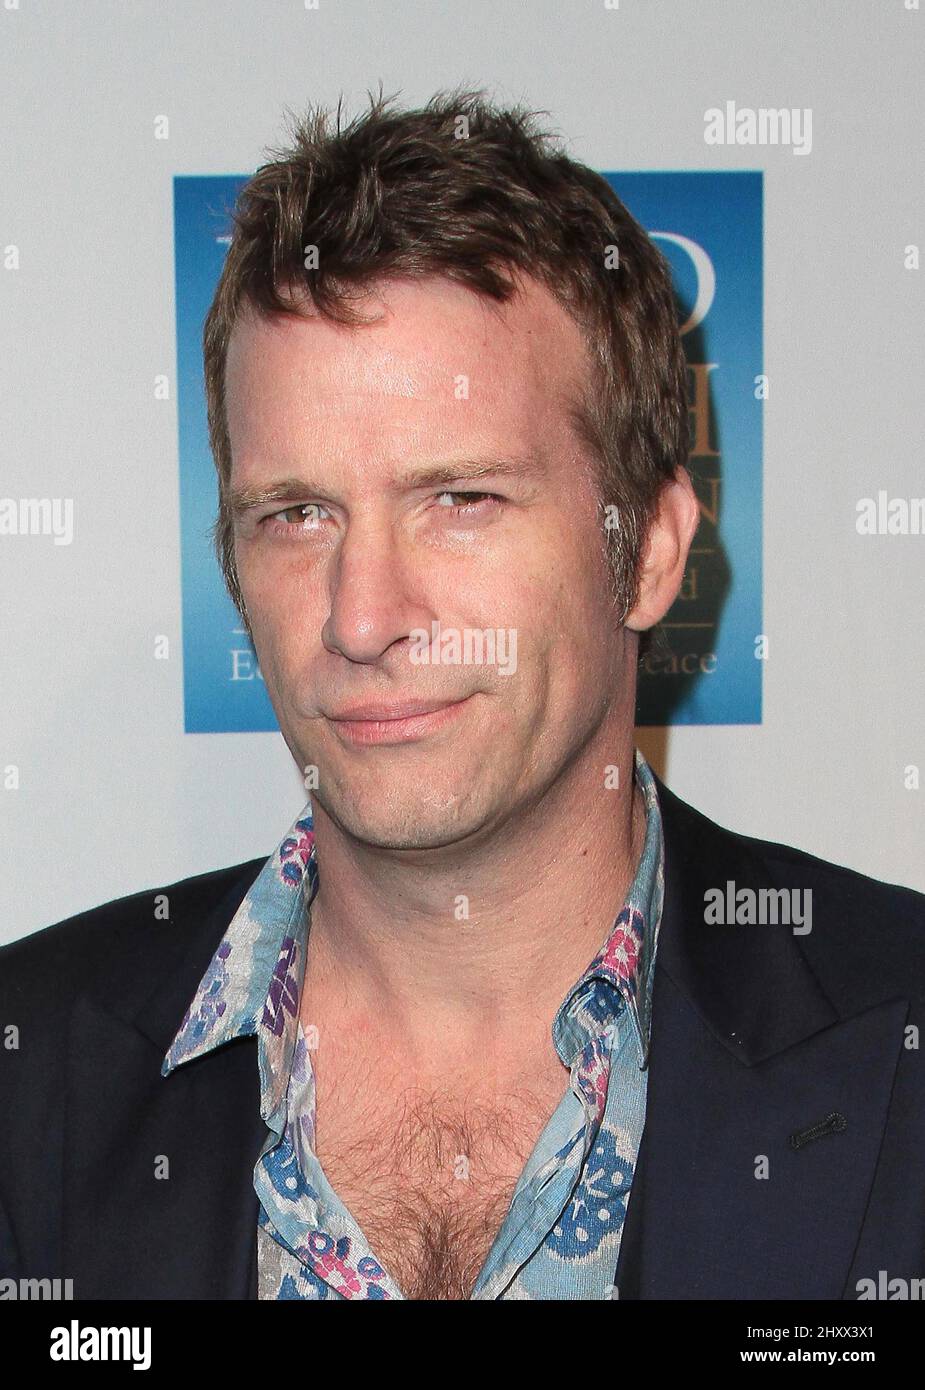 Thomas Jane during the 3rd Annual 'Change Begins Within' Benefit Celebration presented by The David Lynch Foundation held at LACMA, California Stock Photo